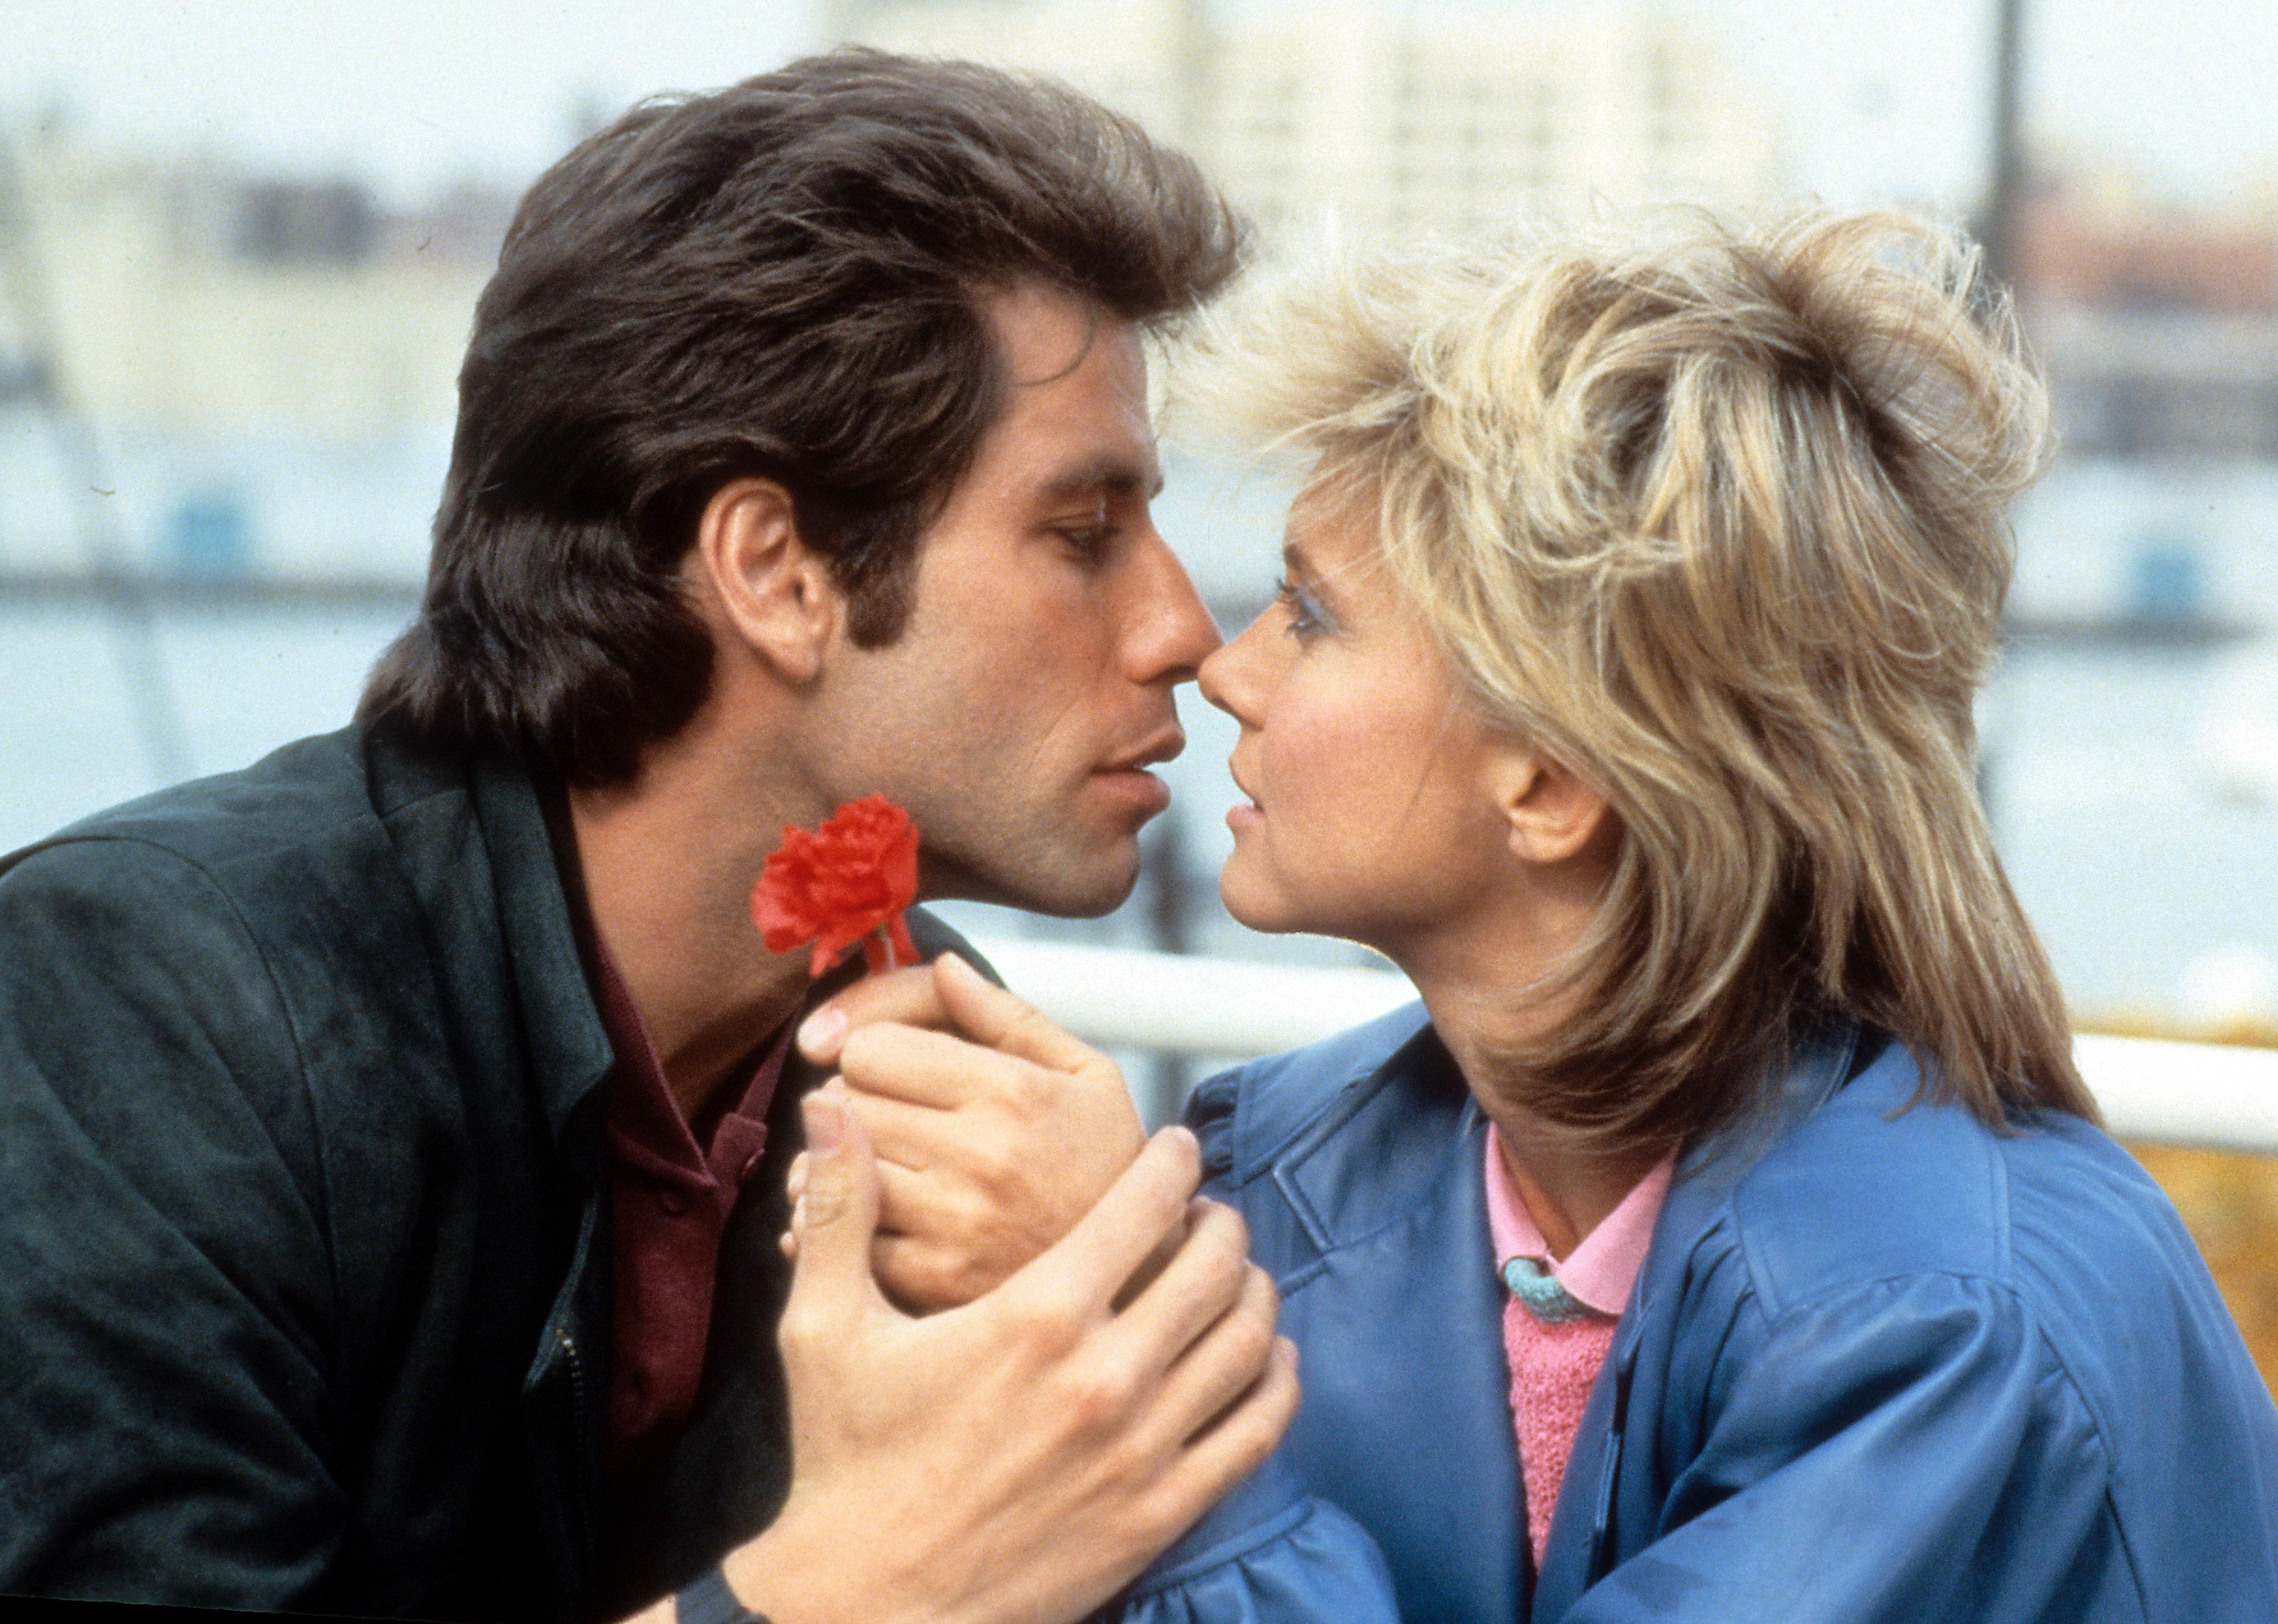 John Travolta and Olivia Newton-John looking longingly into each other's eyes as they go in for a kiss.